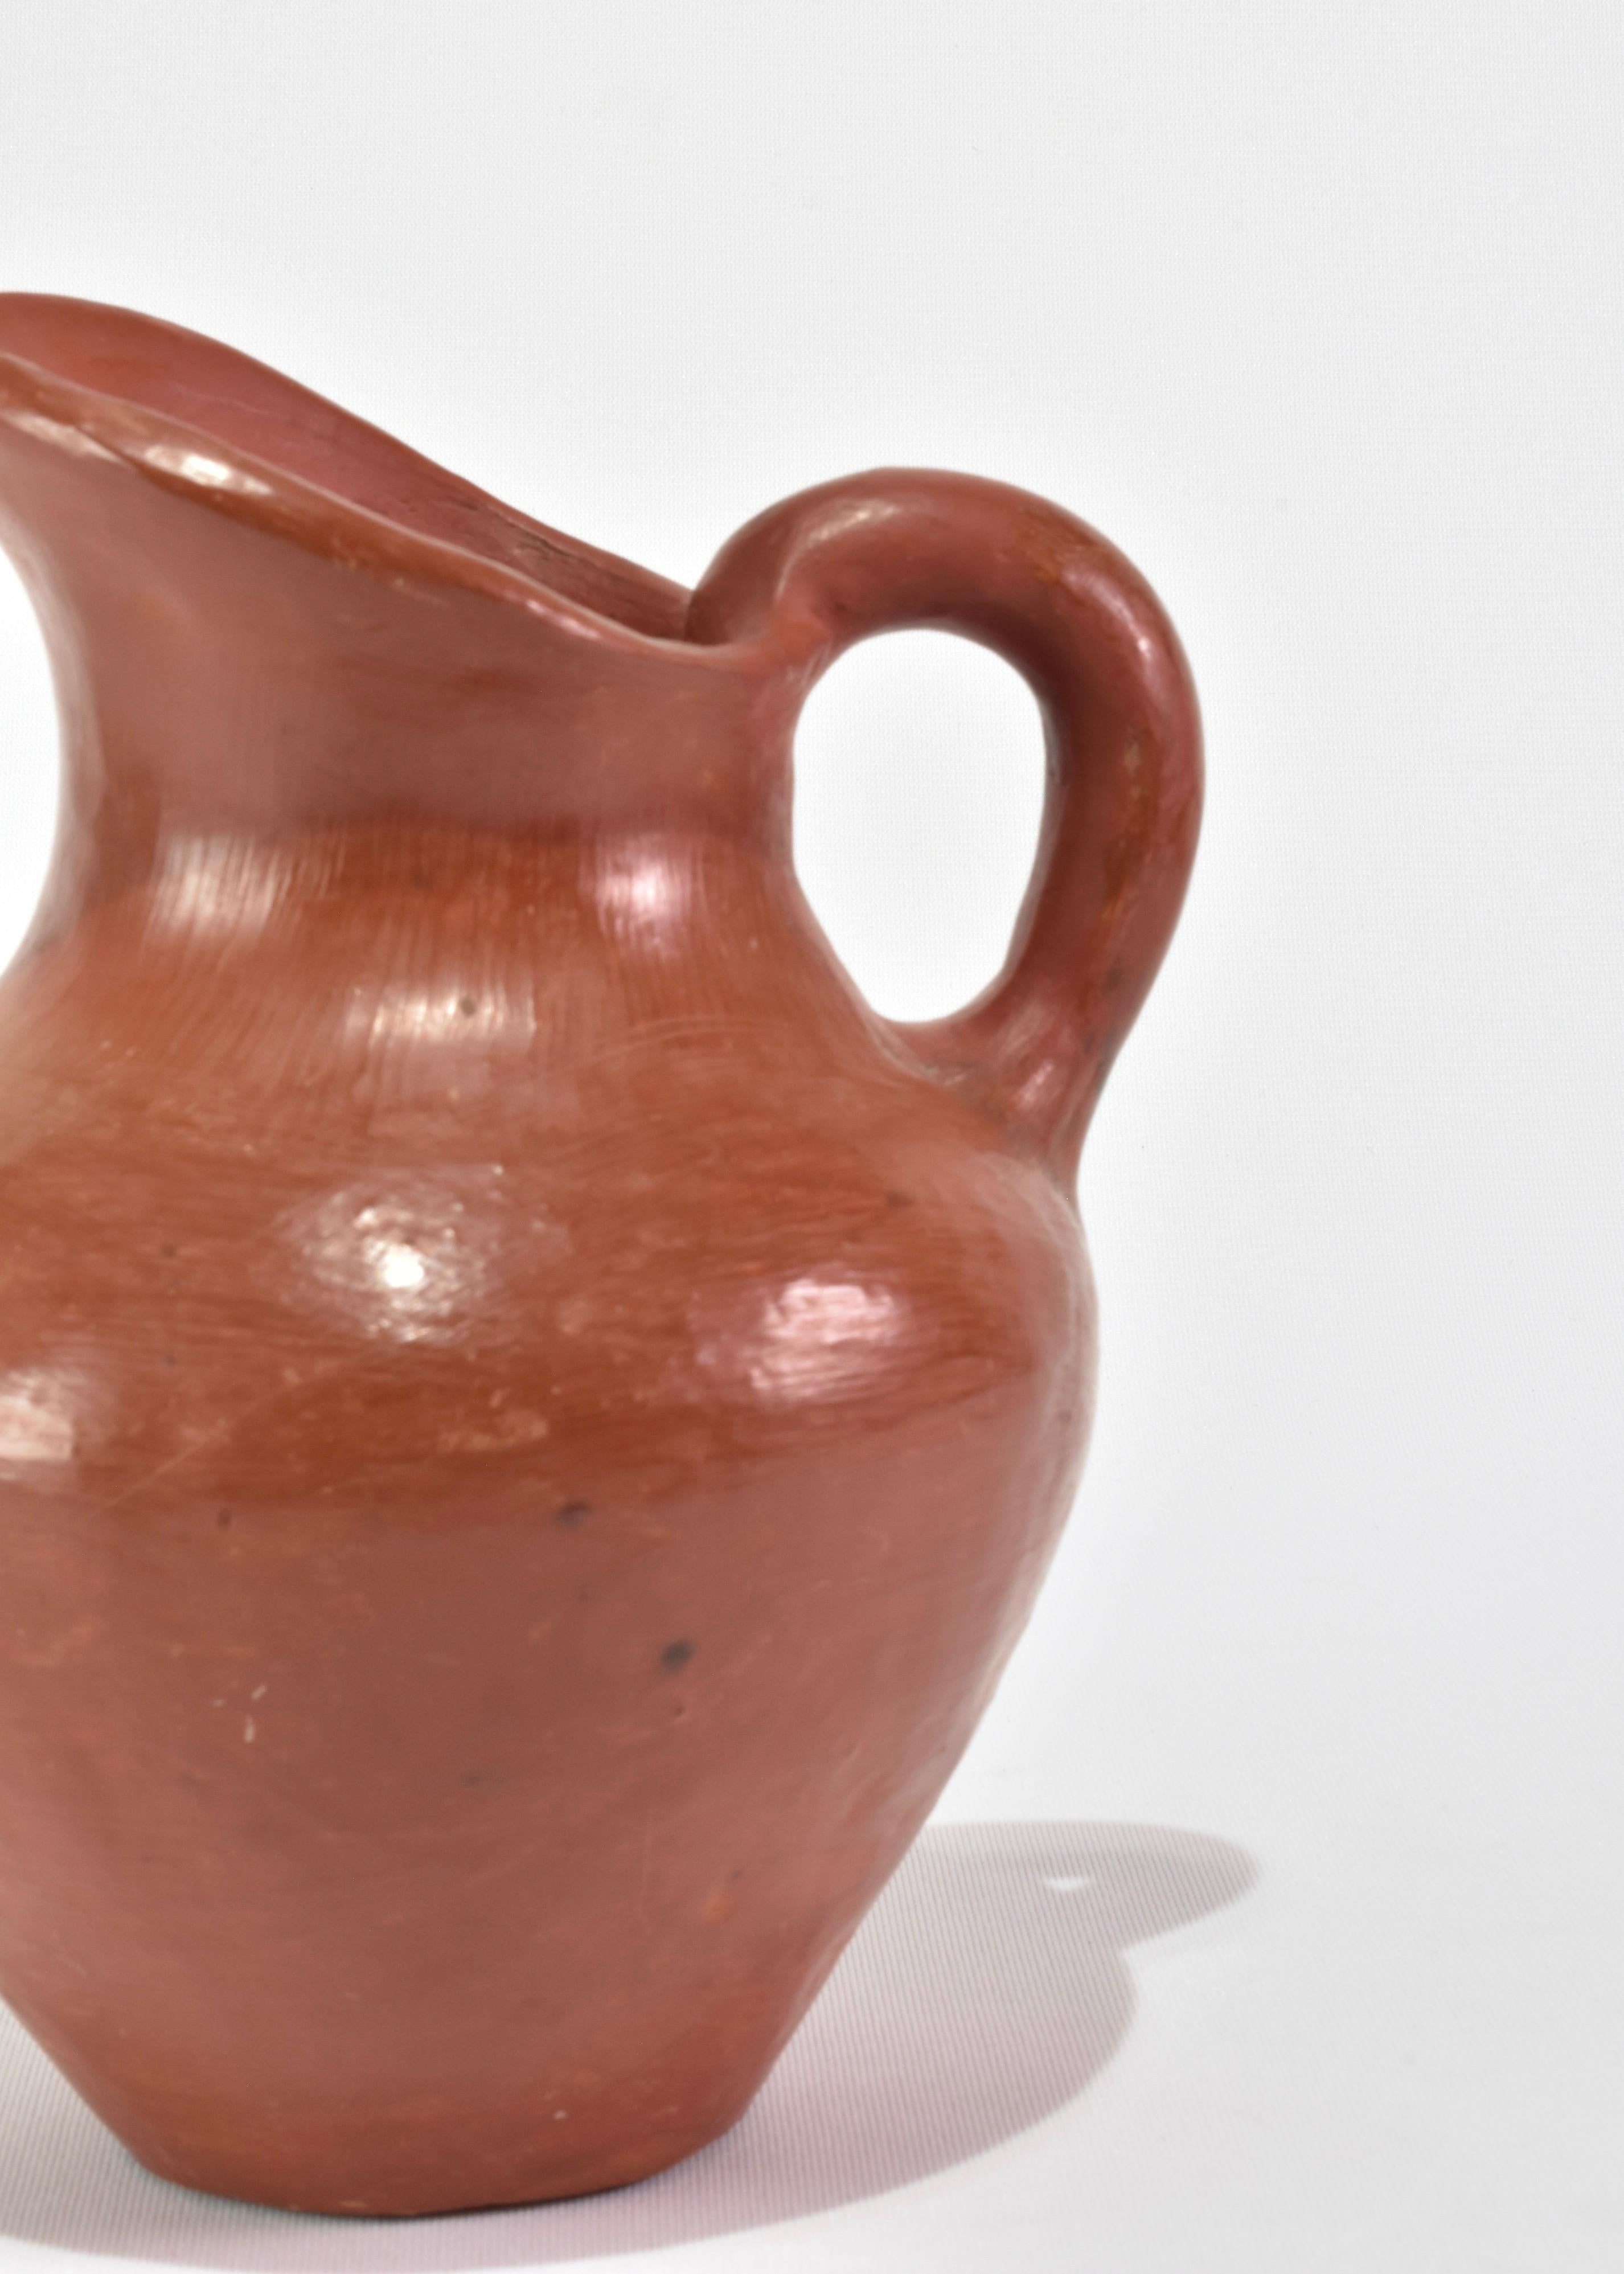 Vintage handmade terracotta pitcher. Display on its own as a sculptural piece or add a dried floral arrangement.